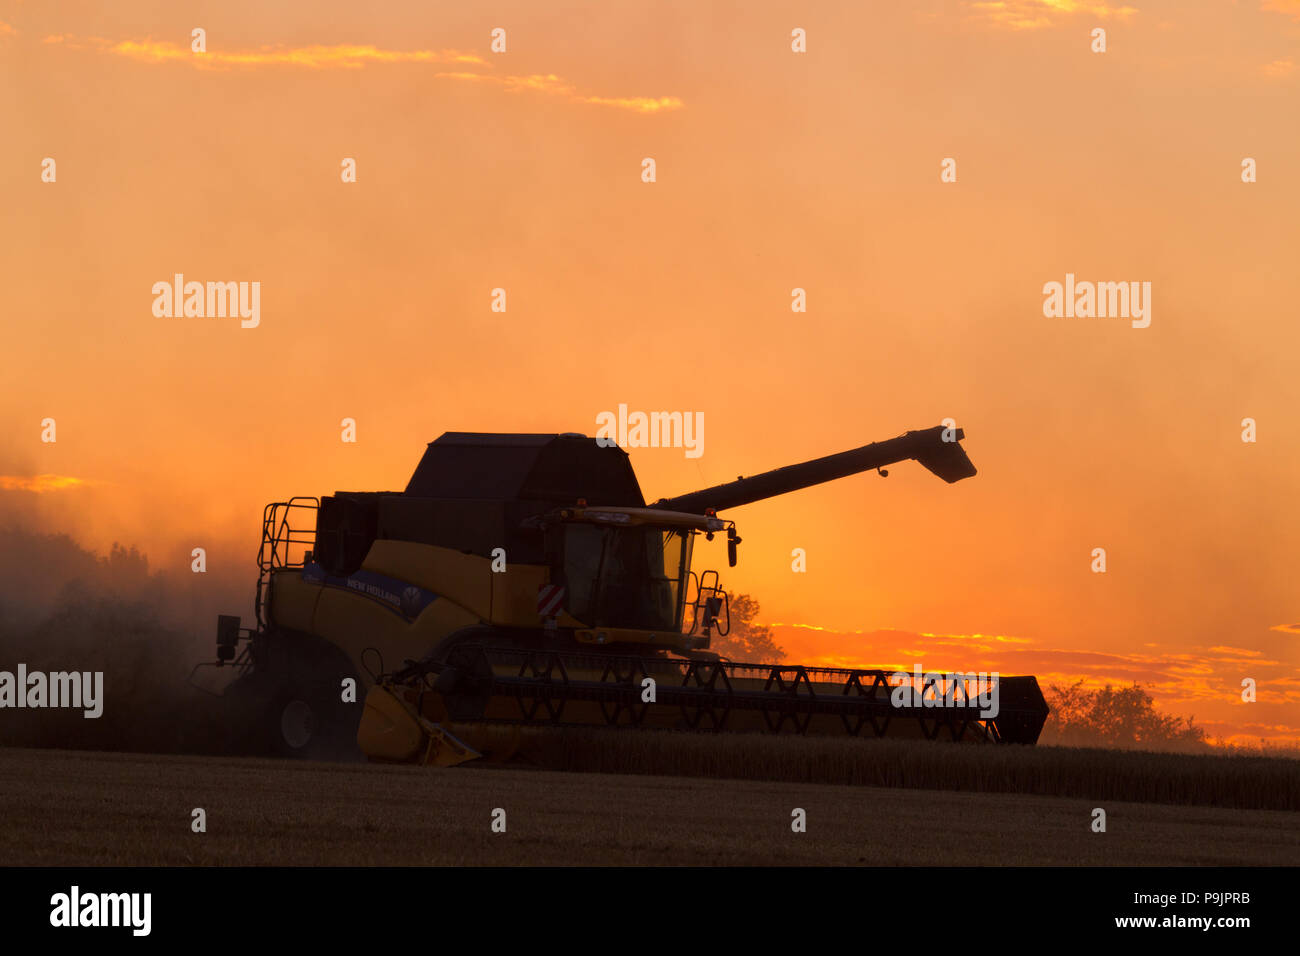 Harvester harvests barley on a field, grain harvest, silhouette in the sunset, Saxony, Germany Stock Photo